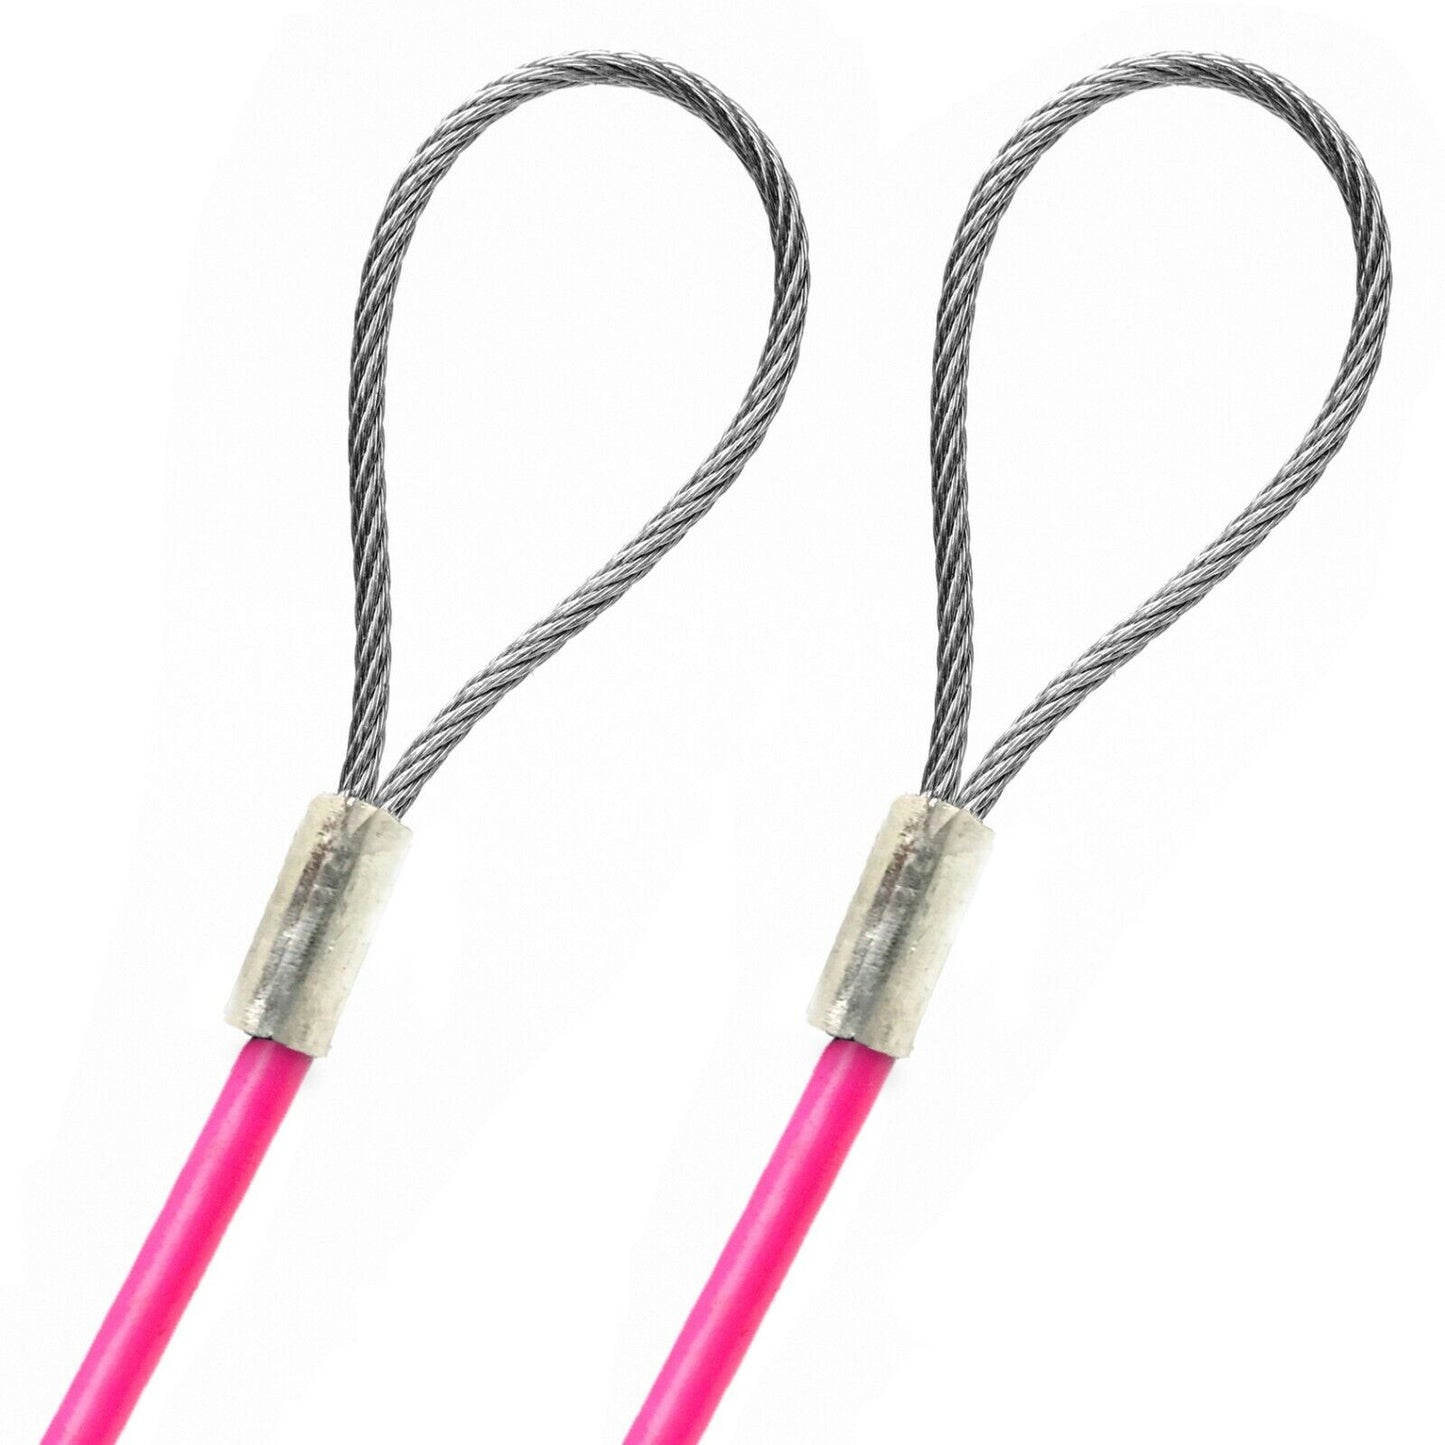 1-100ft Order To Size 3/16 Galvanized Steel Cable PINK Vinyl Coated To 1/8 Made To Order In USA